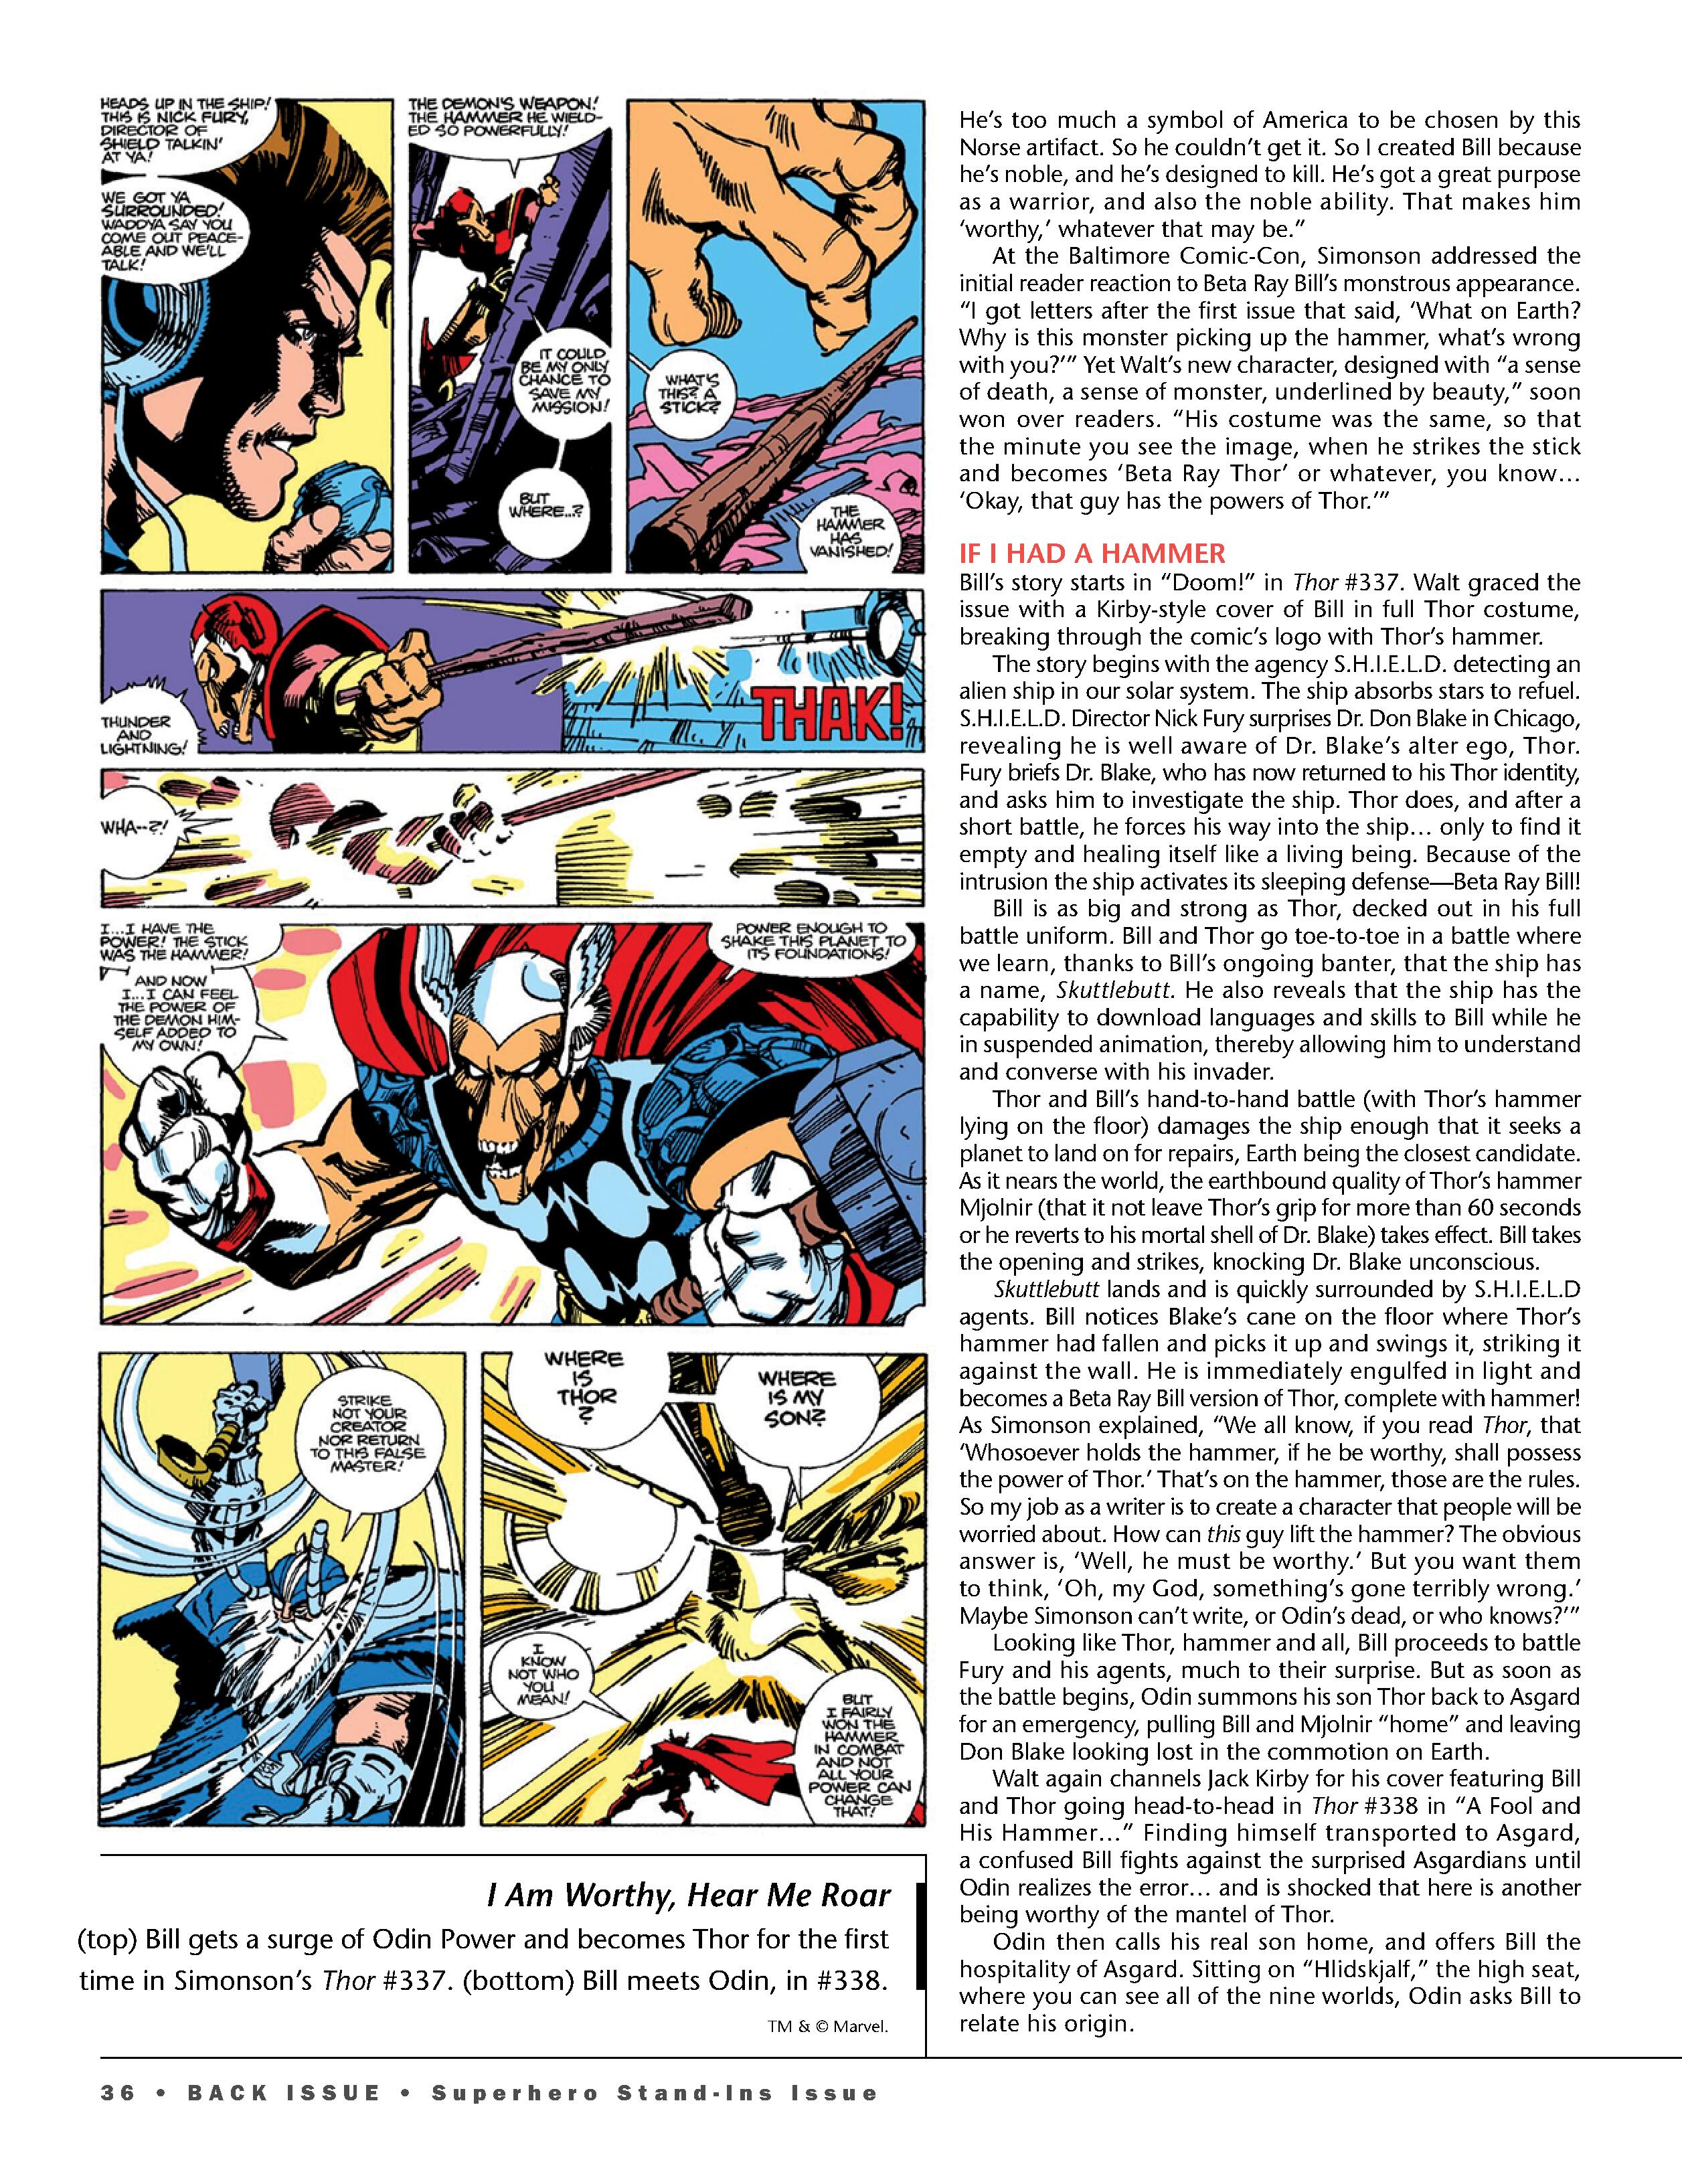 Read online Back Issue comic -  Issue #117 - 38